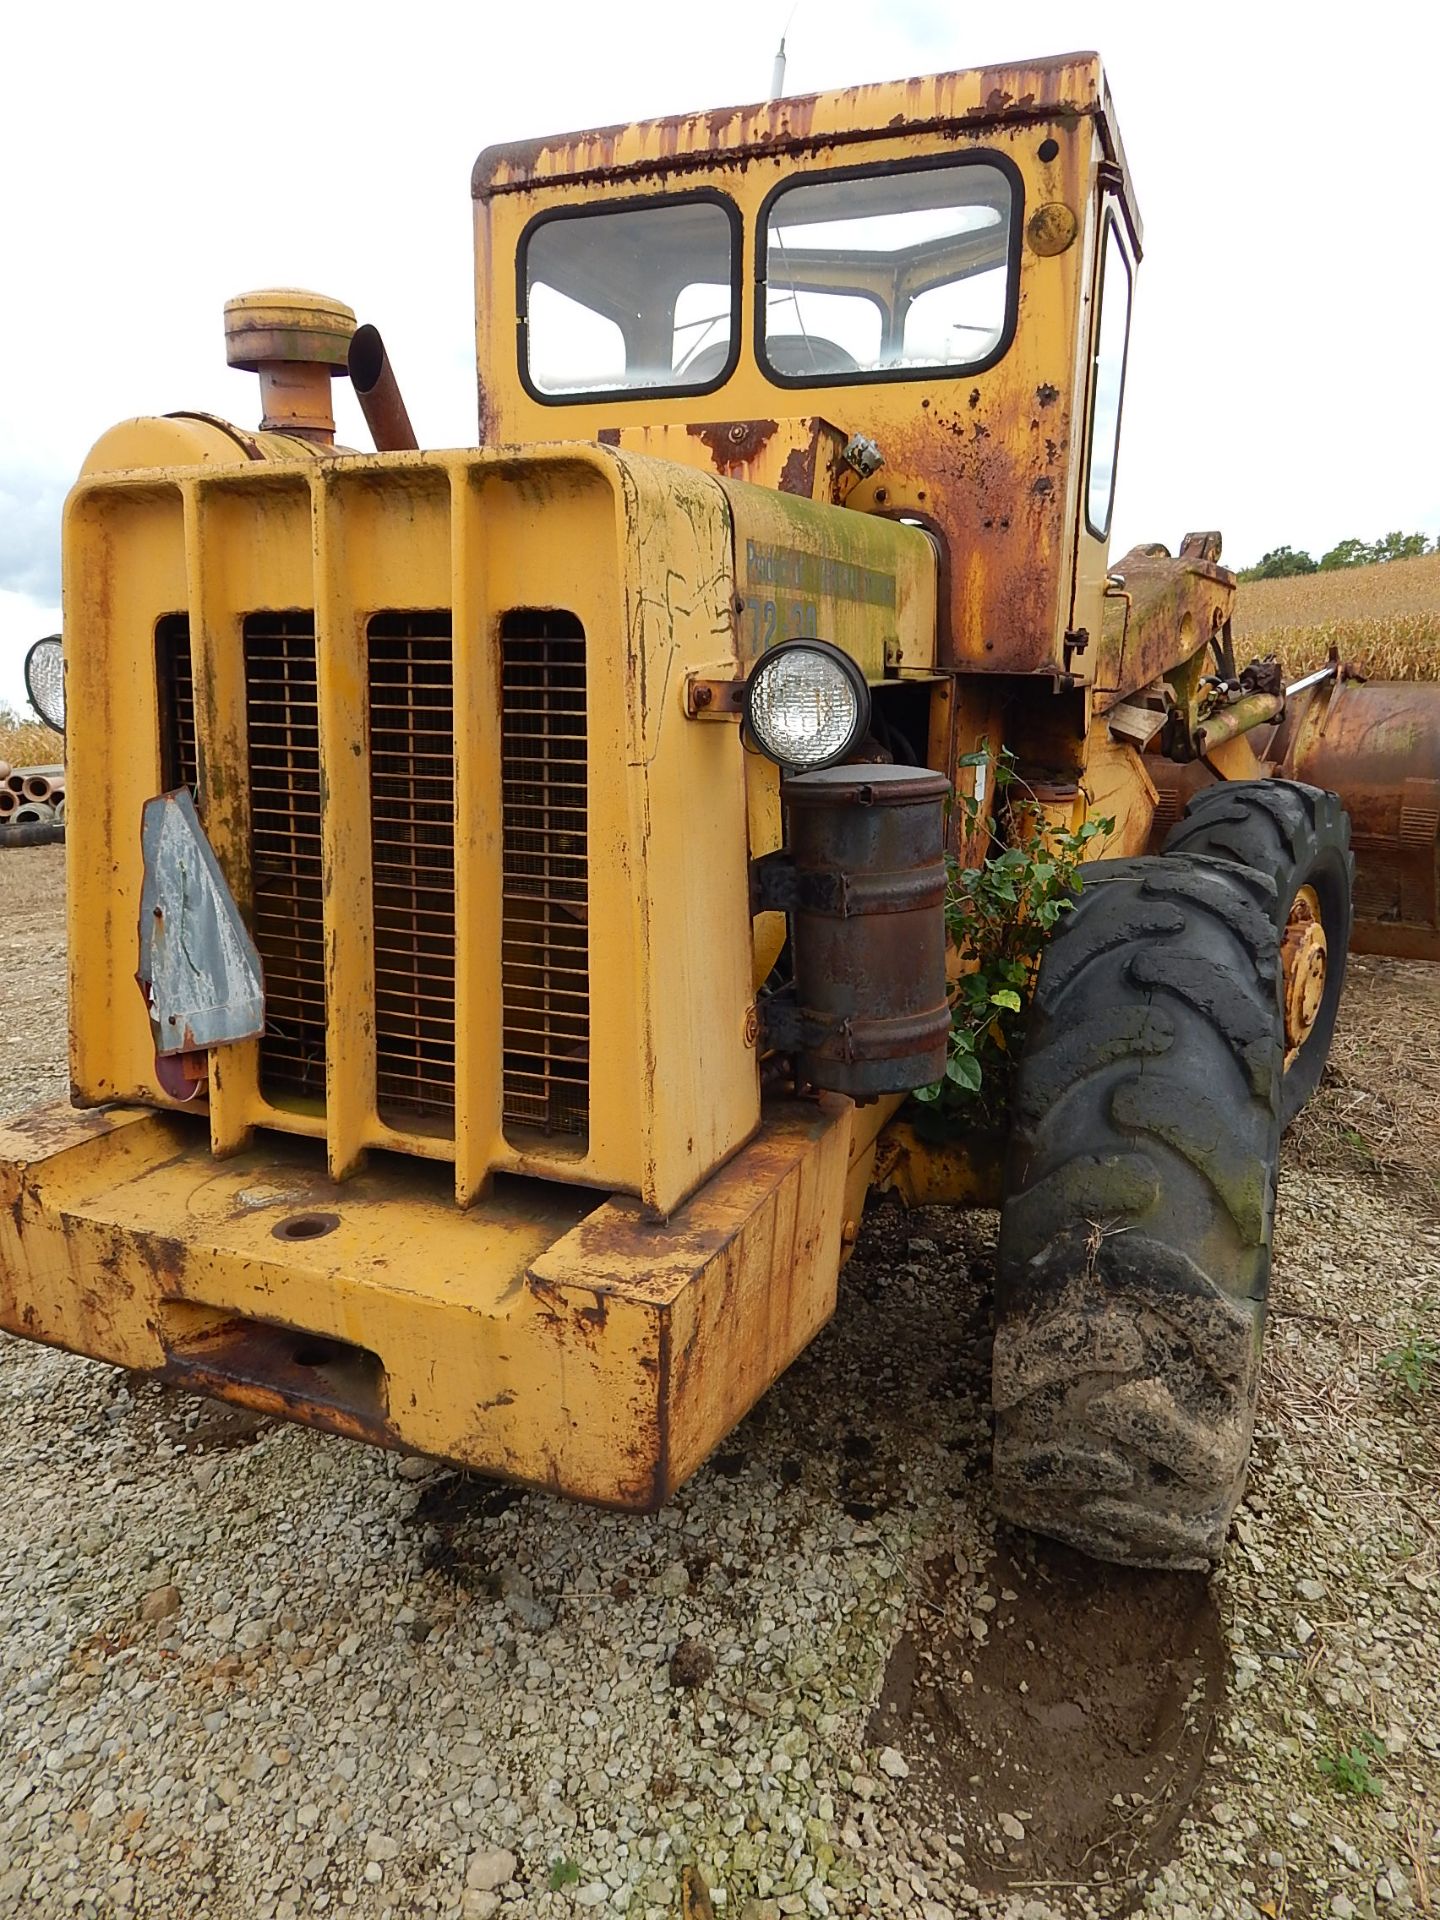 Terex/Euclid 72-30 Rubber Tired Loader, 8 ft Bucket, 2148 Hours, s/n 16UPM40248, Not in Service - Image 6 of 12